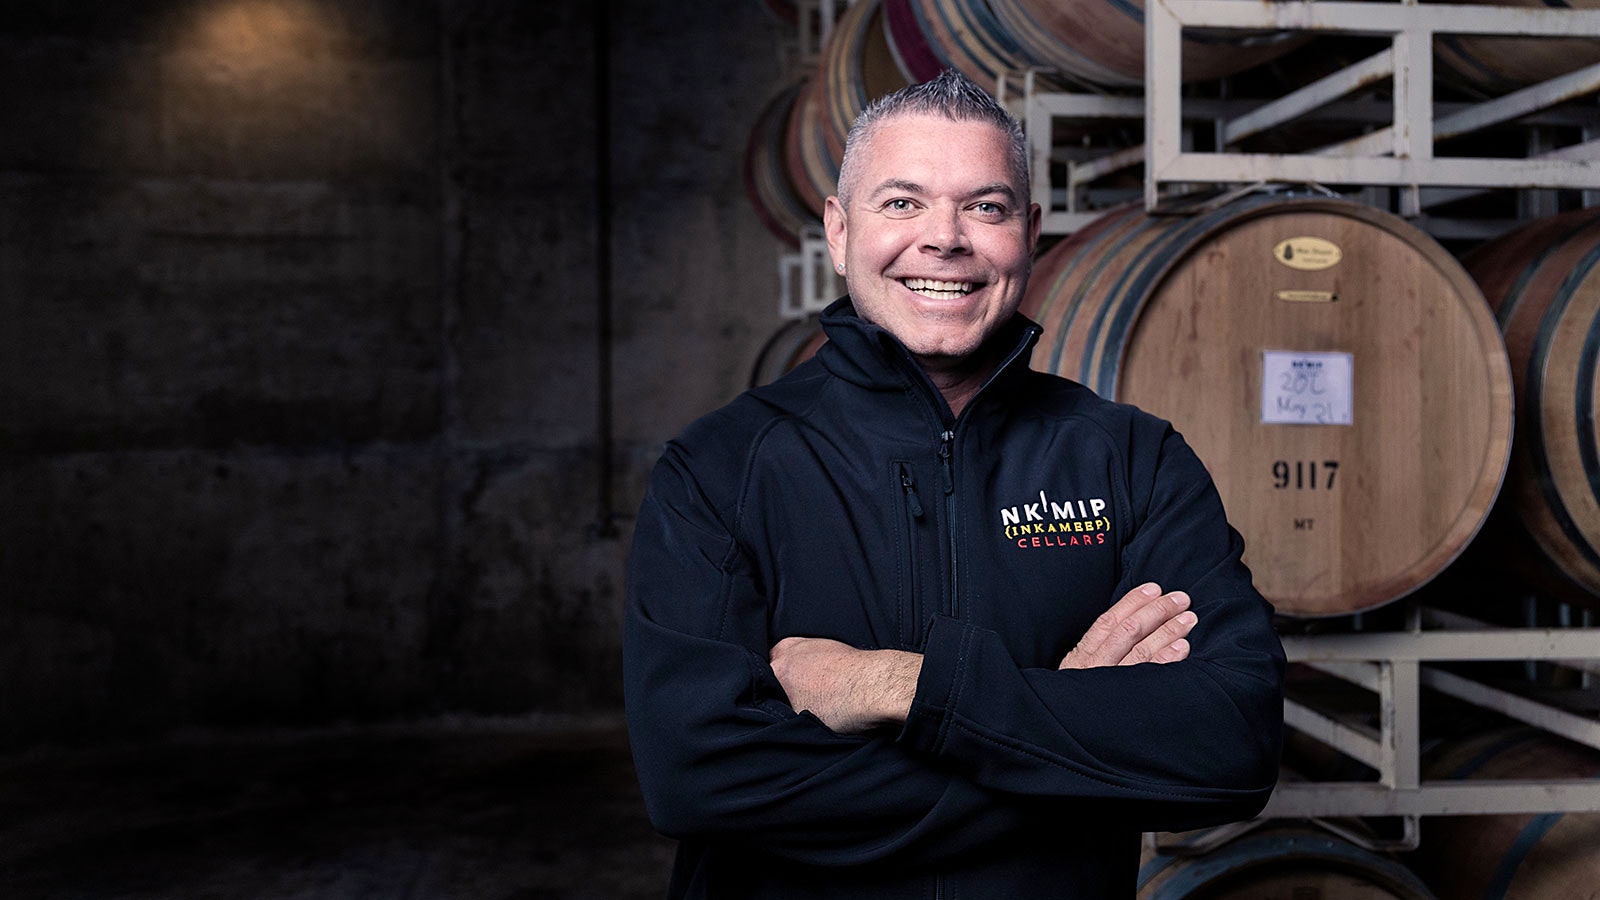  Portrait of Nk'Mip winemaker Justin Hall in front of a stack of wine barrels